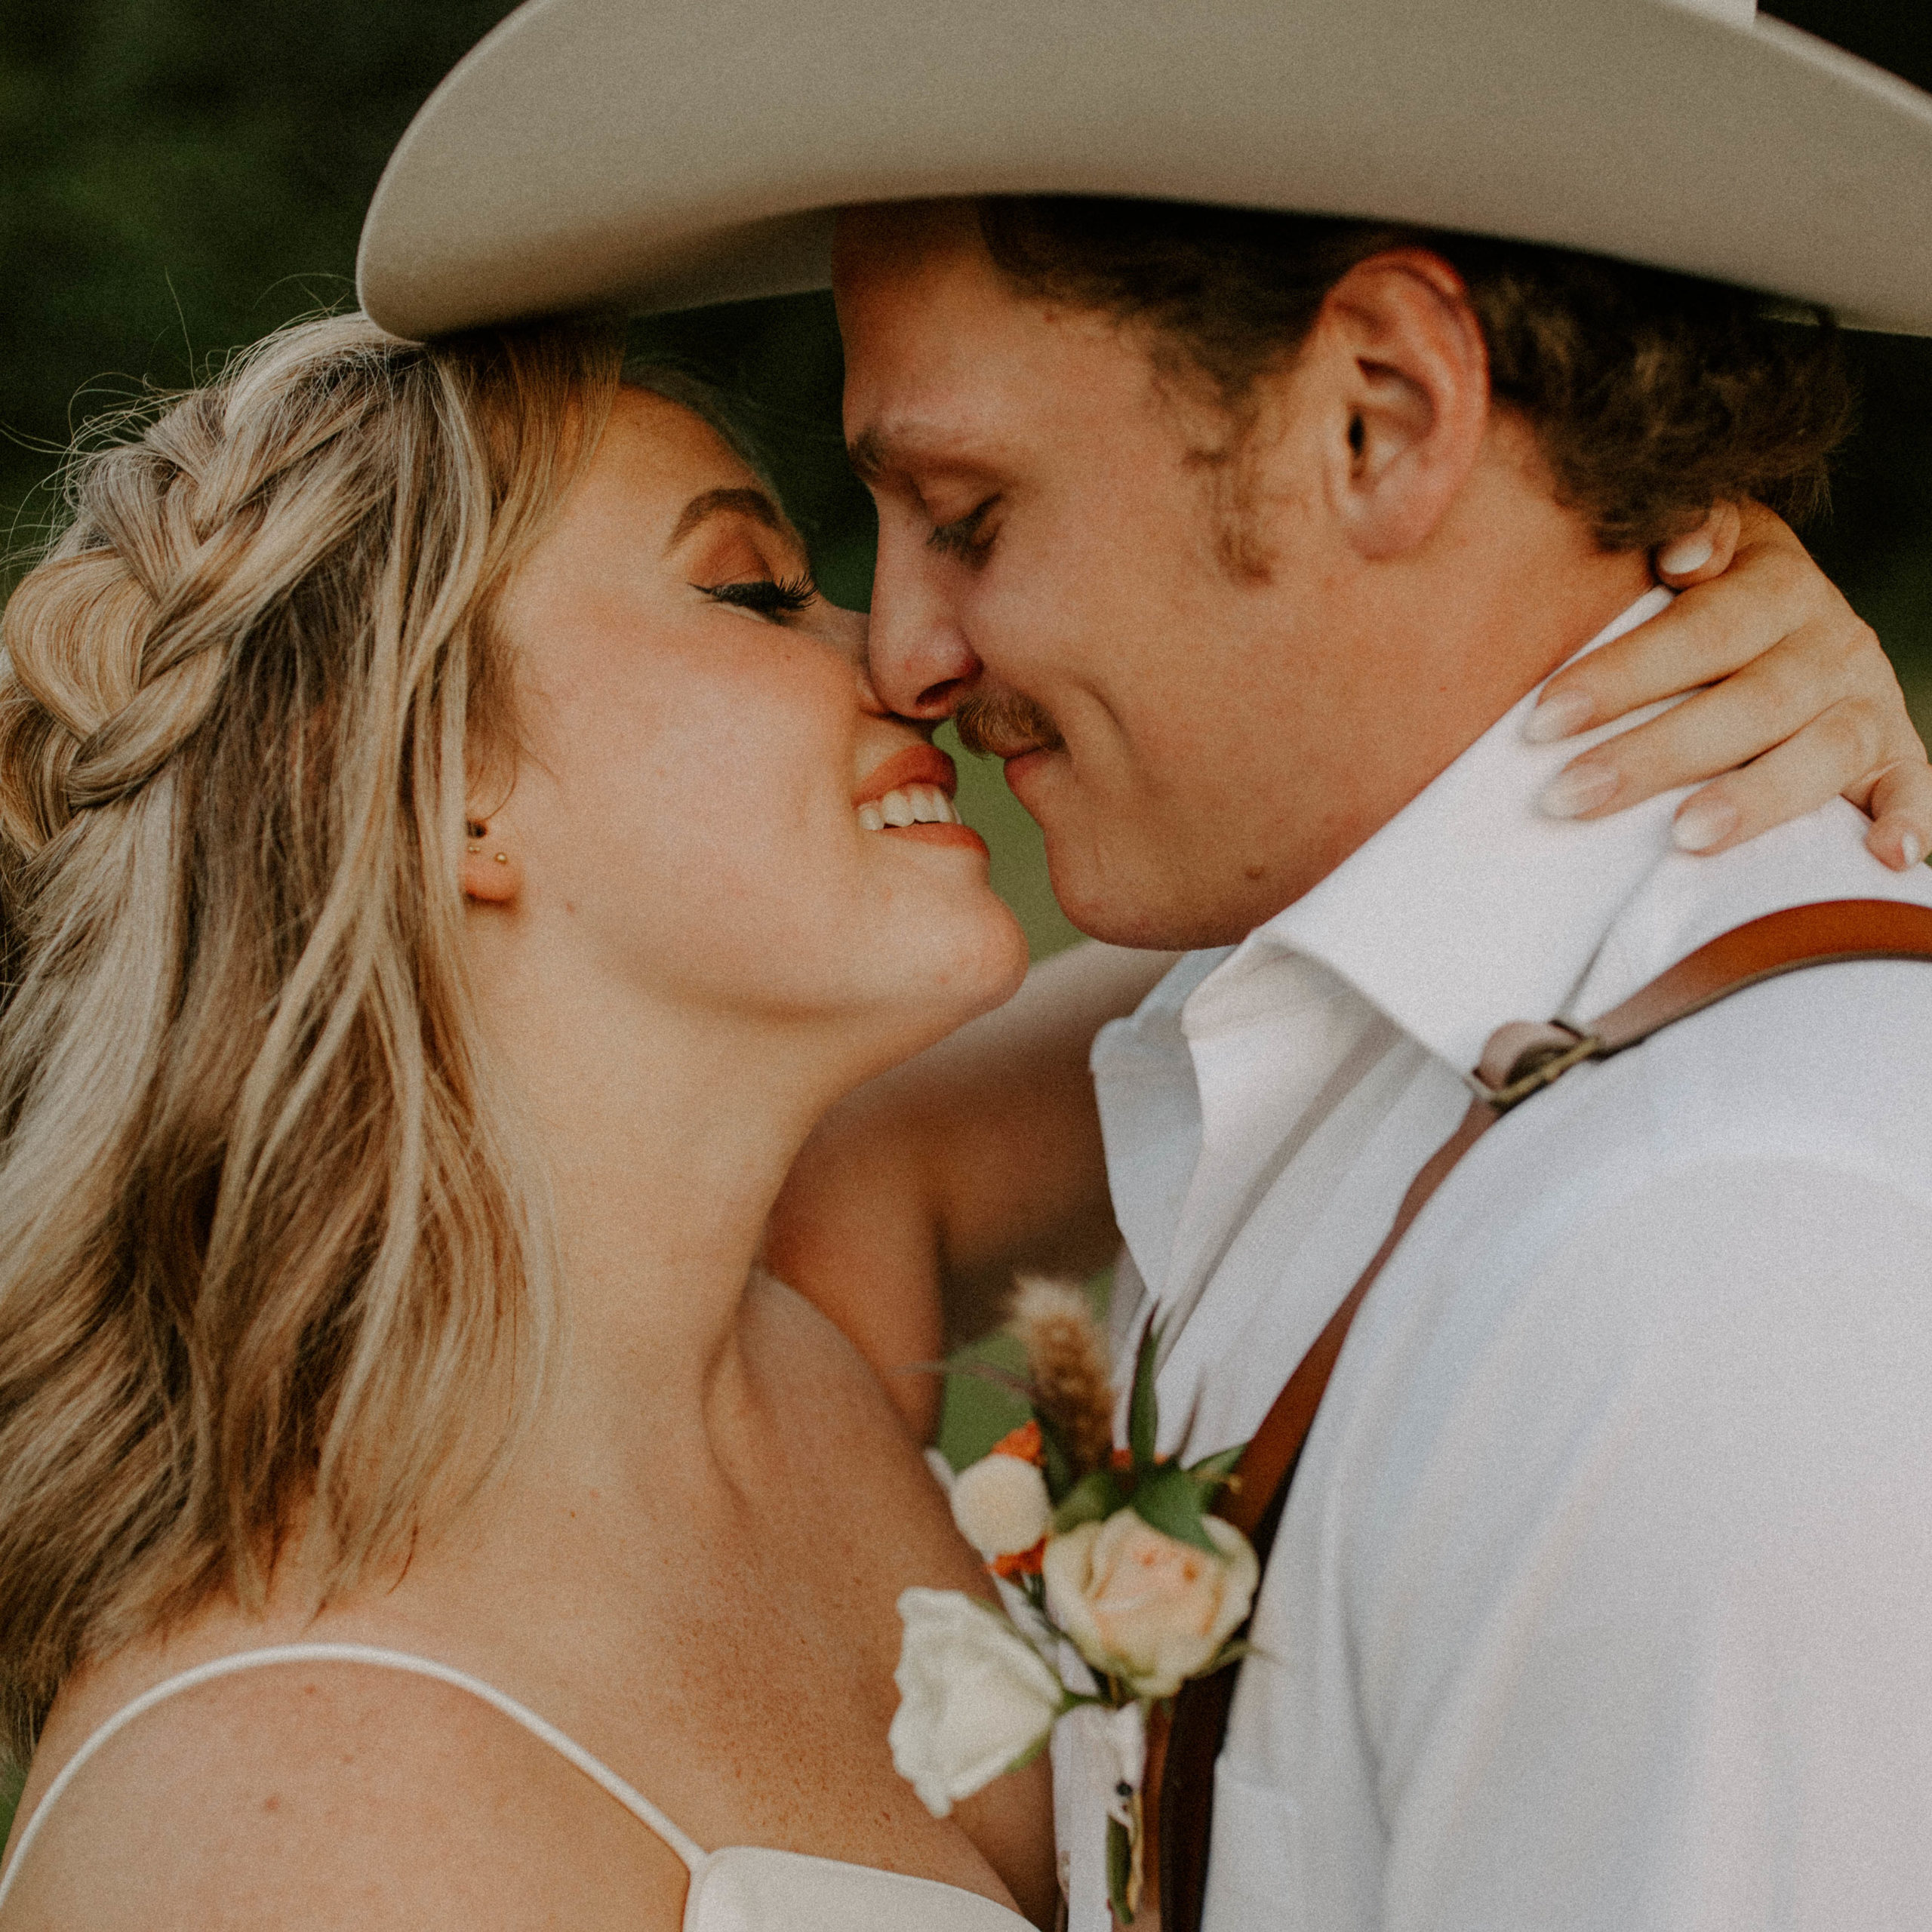 Boho intimate backyard wedding in Texas. These warm and moody images are full of candid and natural moments. Photography by Sullivan Taylor, destination wedding and elopement photographer based in Texas.